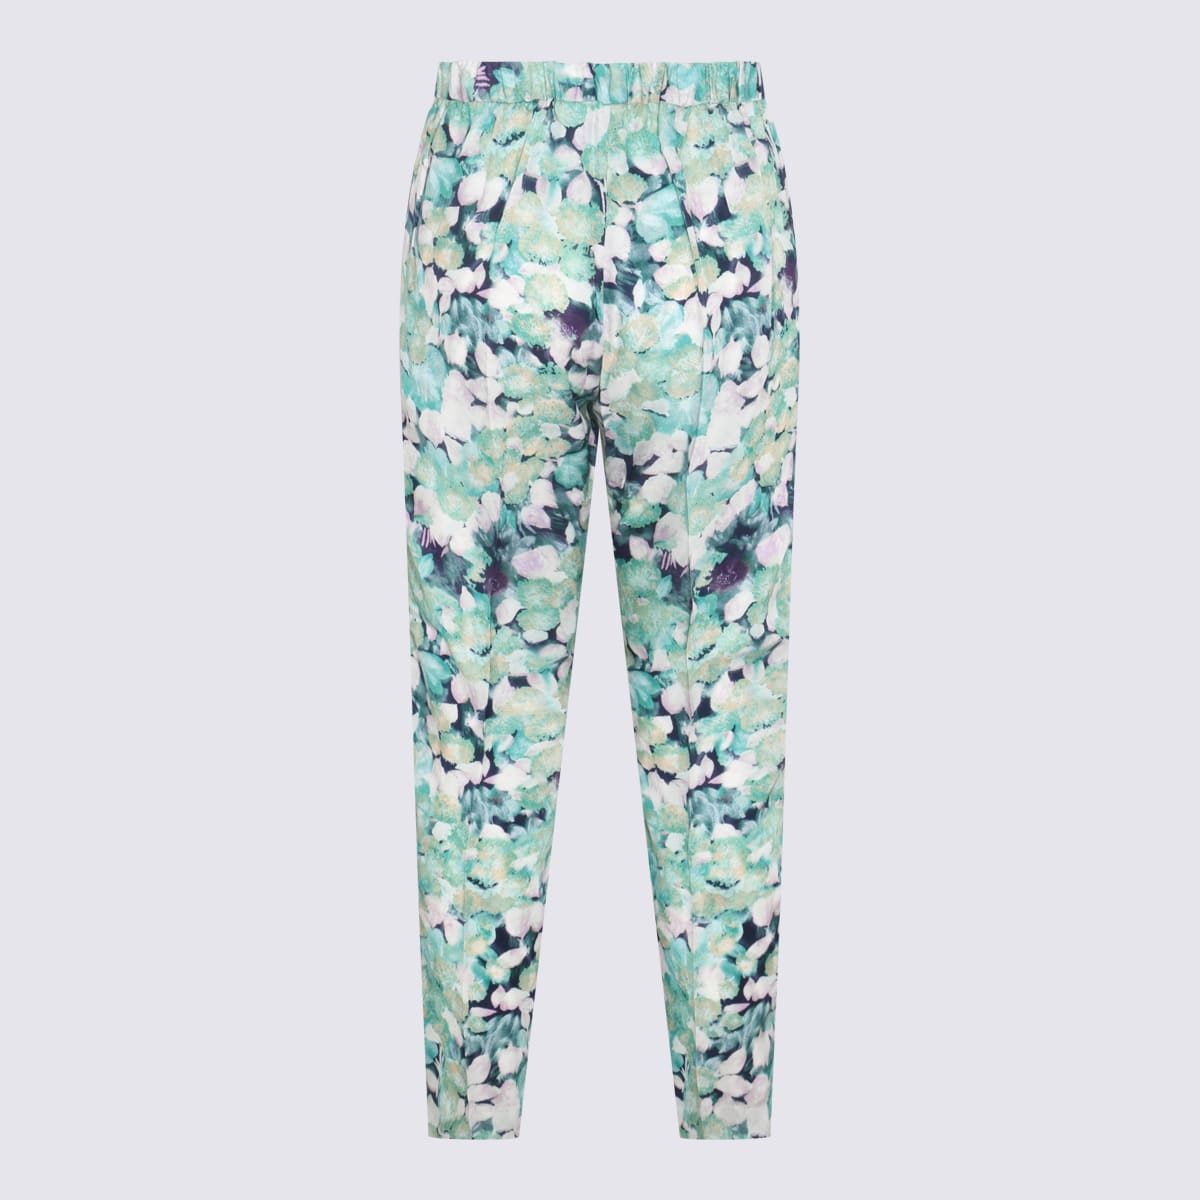 DRIES VAN NOTEN TURQUOISE AND BLUE FLOREAL PANTS